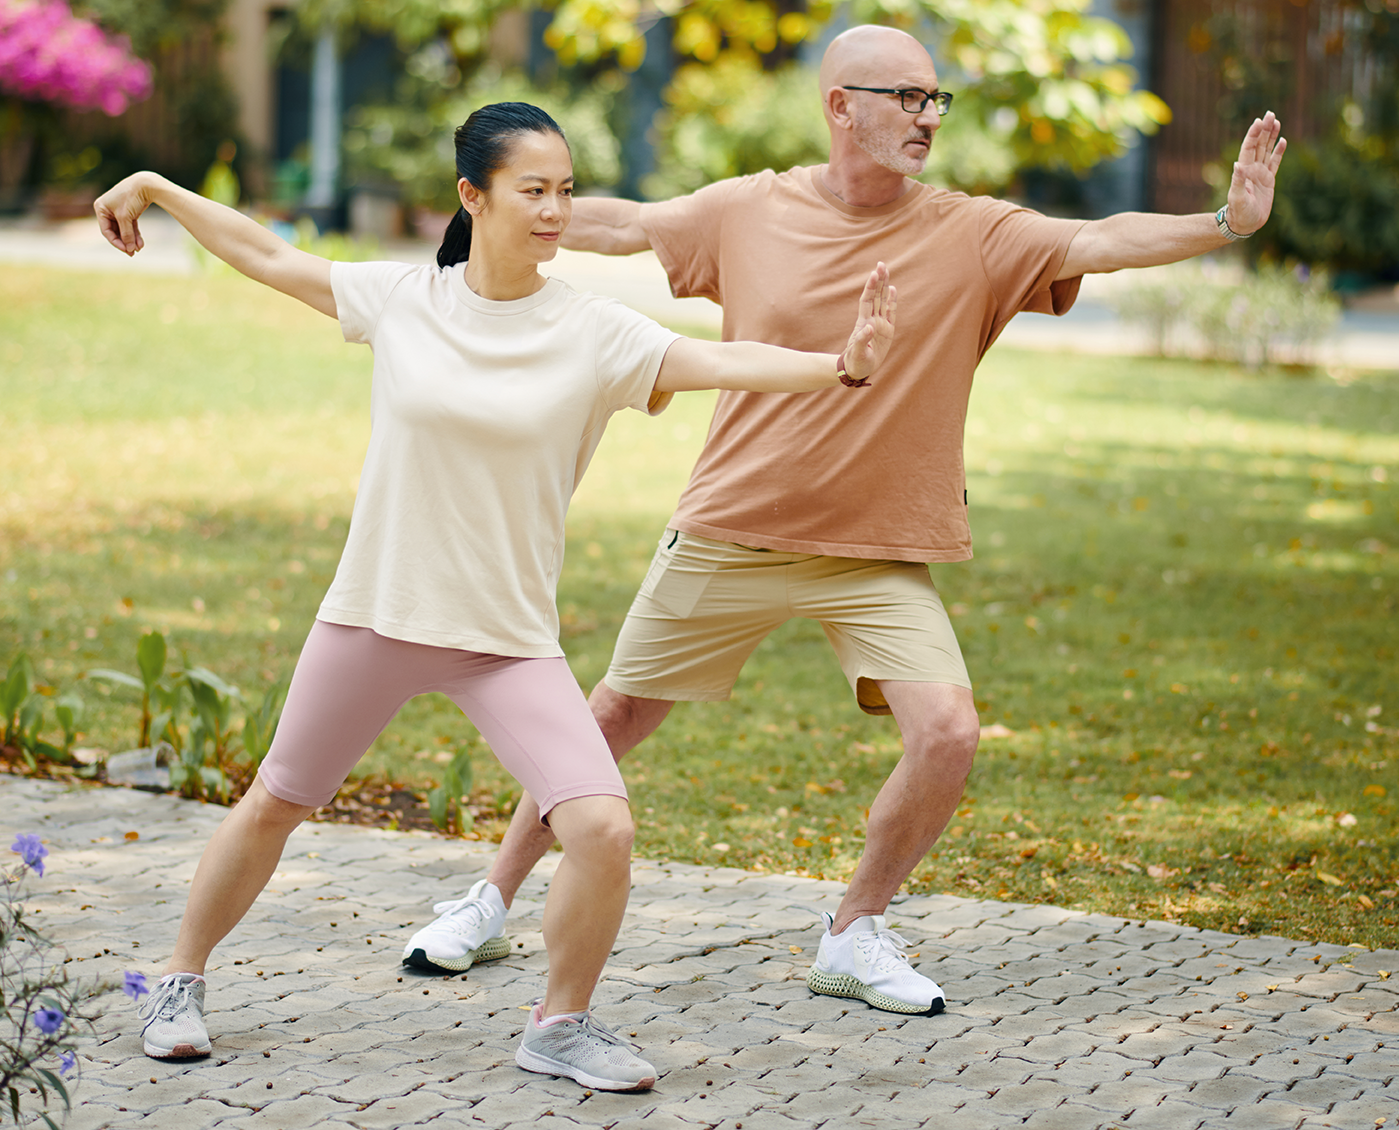 two people in Tai Chi poses outside